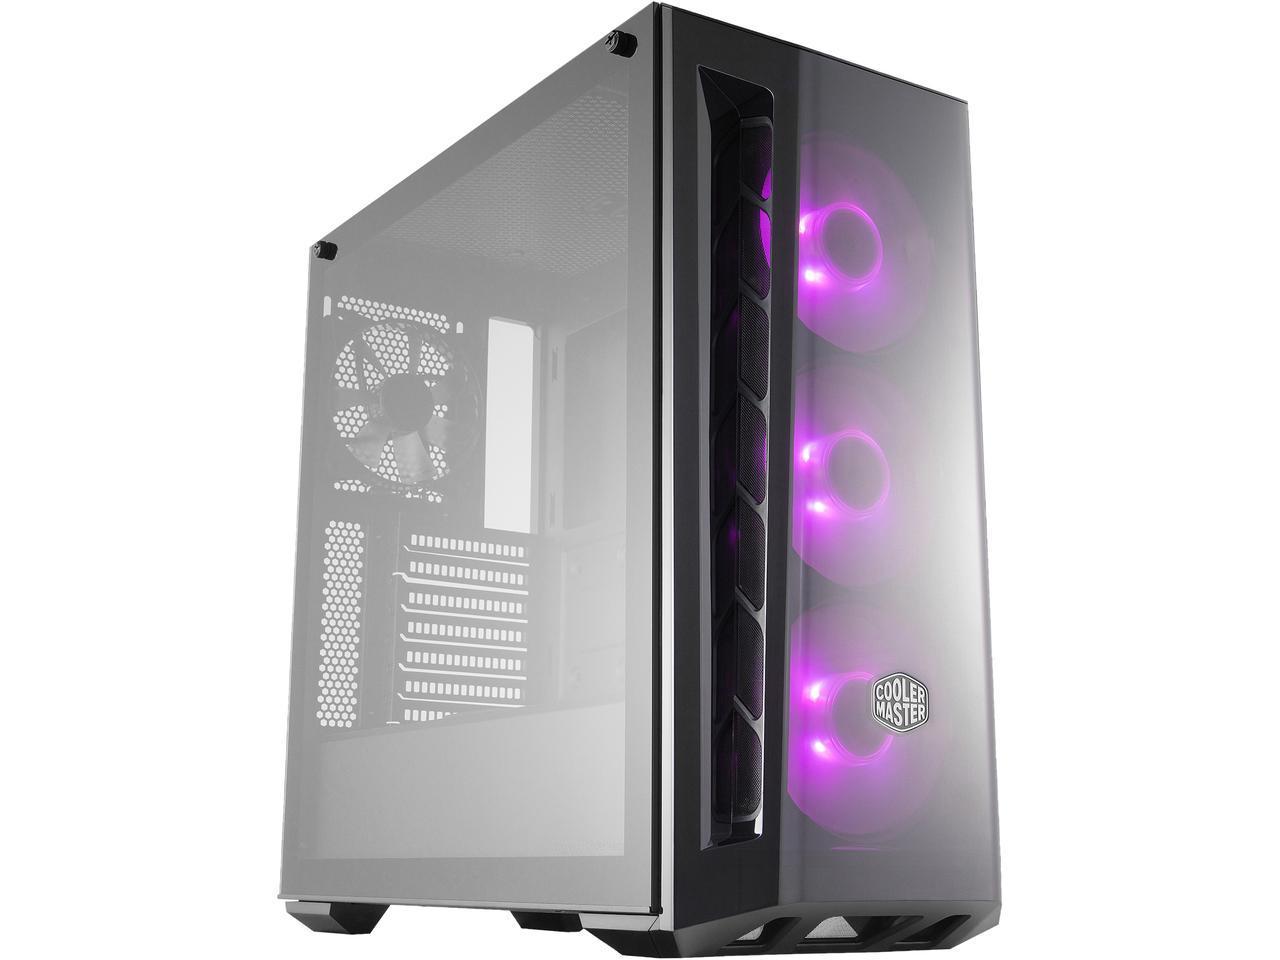 Cooler Master MCB-B520-KGNN-RGB MasterBox MB520 RGB Focuses on Lighting and showmanship with a Fully Transparent Front Panel and 3 RGB Fans